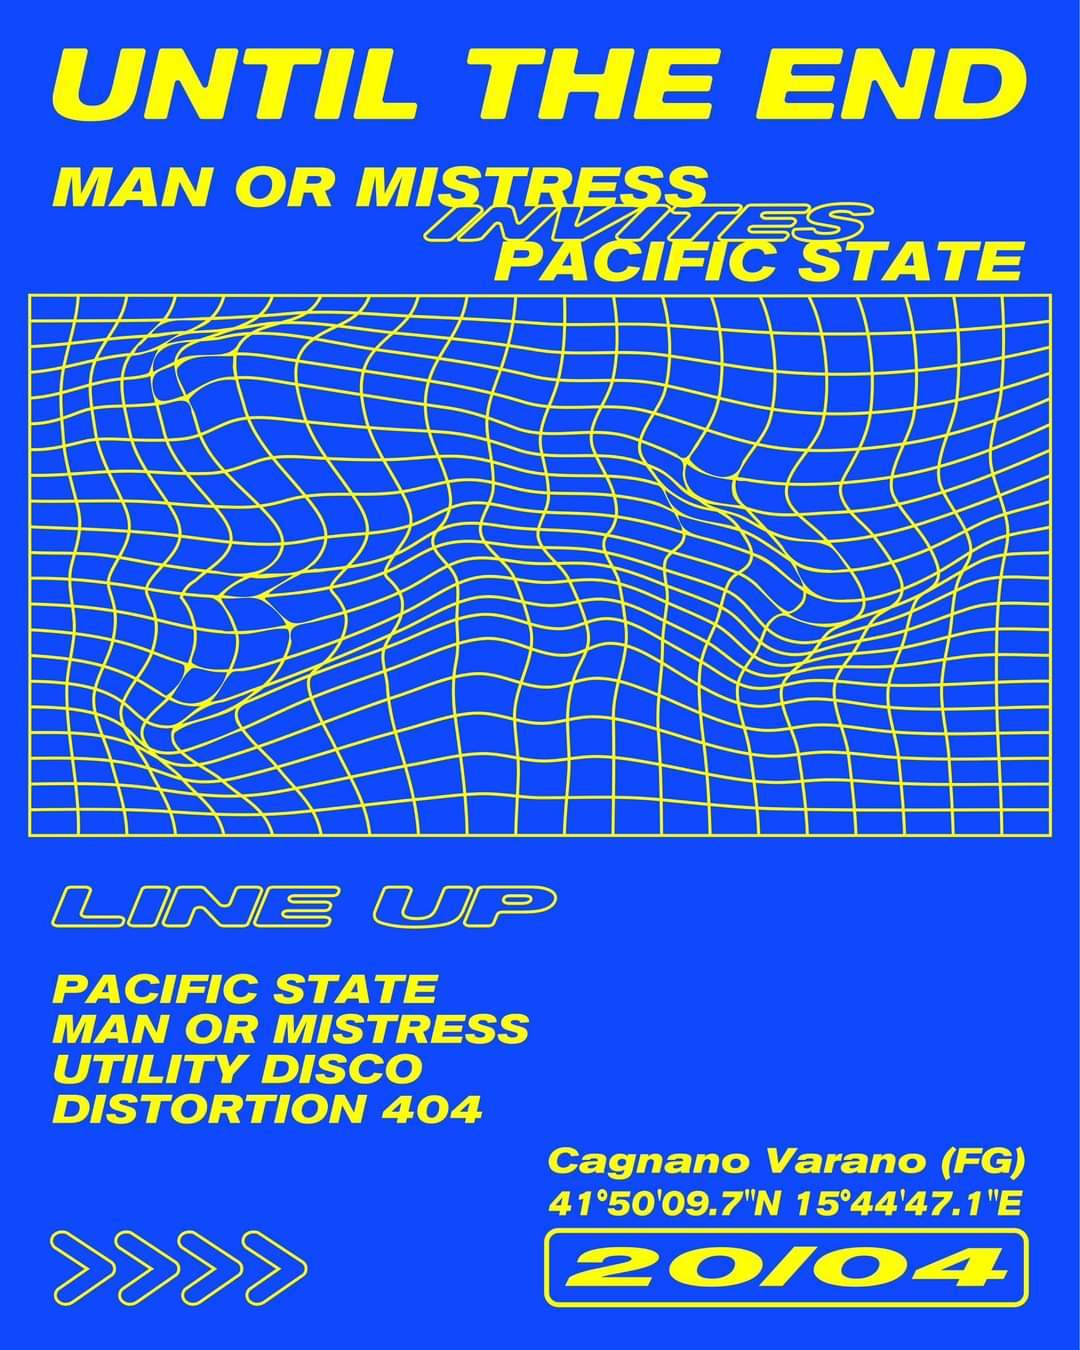 Man Or Mistress invites Pacific State - フライヤー表